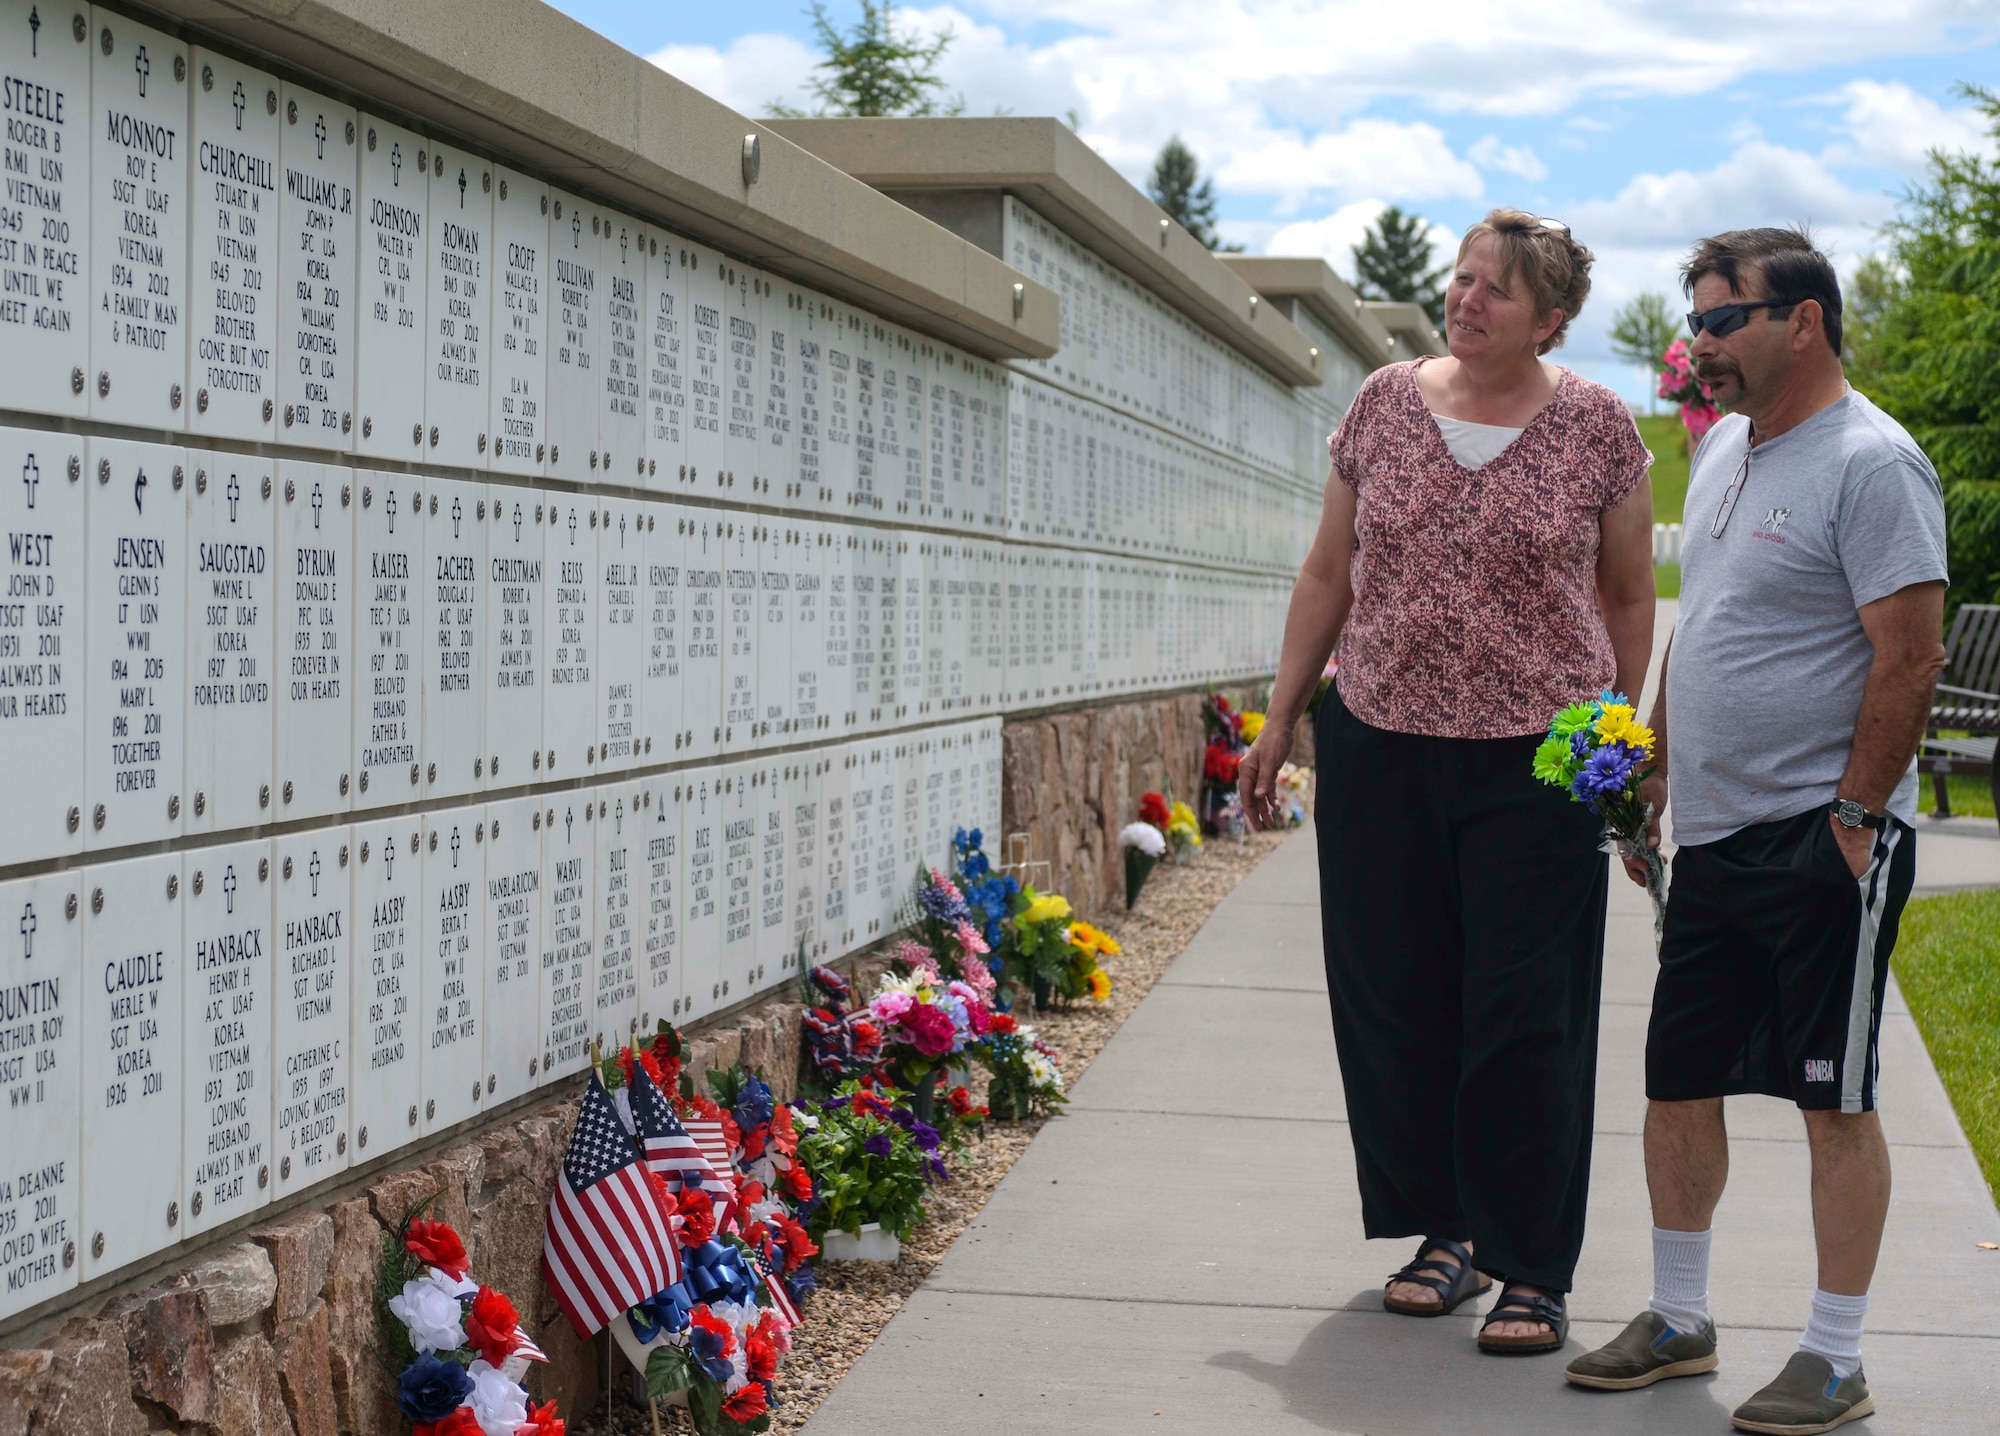 Yvone, left, and Galen Tapio, locals of Rapid City, S.D., search for their relative’s grave at the Black Hills National Cemetery in Sturgis, S.D., May 28, 2016. Family members visit the cemetery throughout the year to mourn for their service members who have passed. To contact the cemetery, call (800) 535-1117. (U.S. Air Force photo by Airman 1st Class Sadie Colbert/Released)